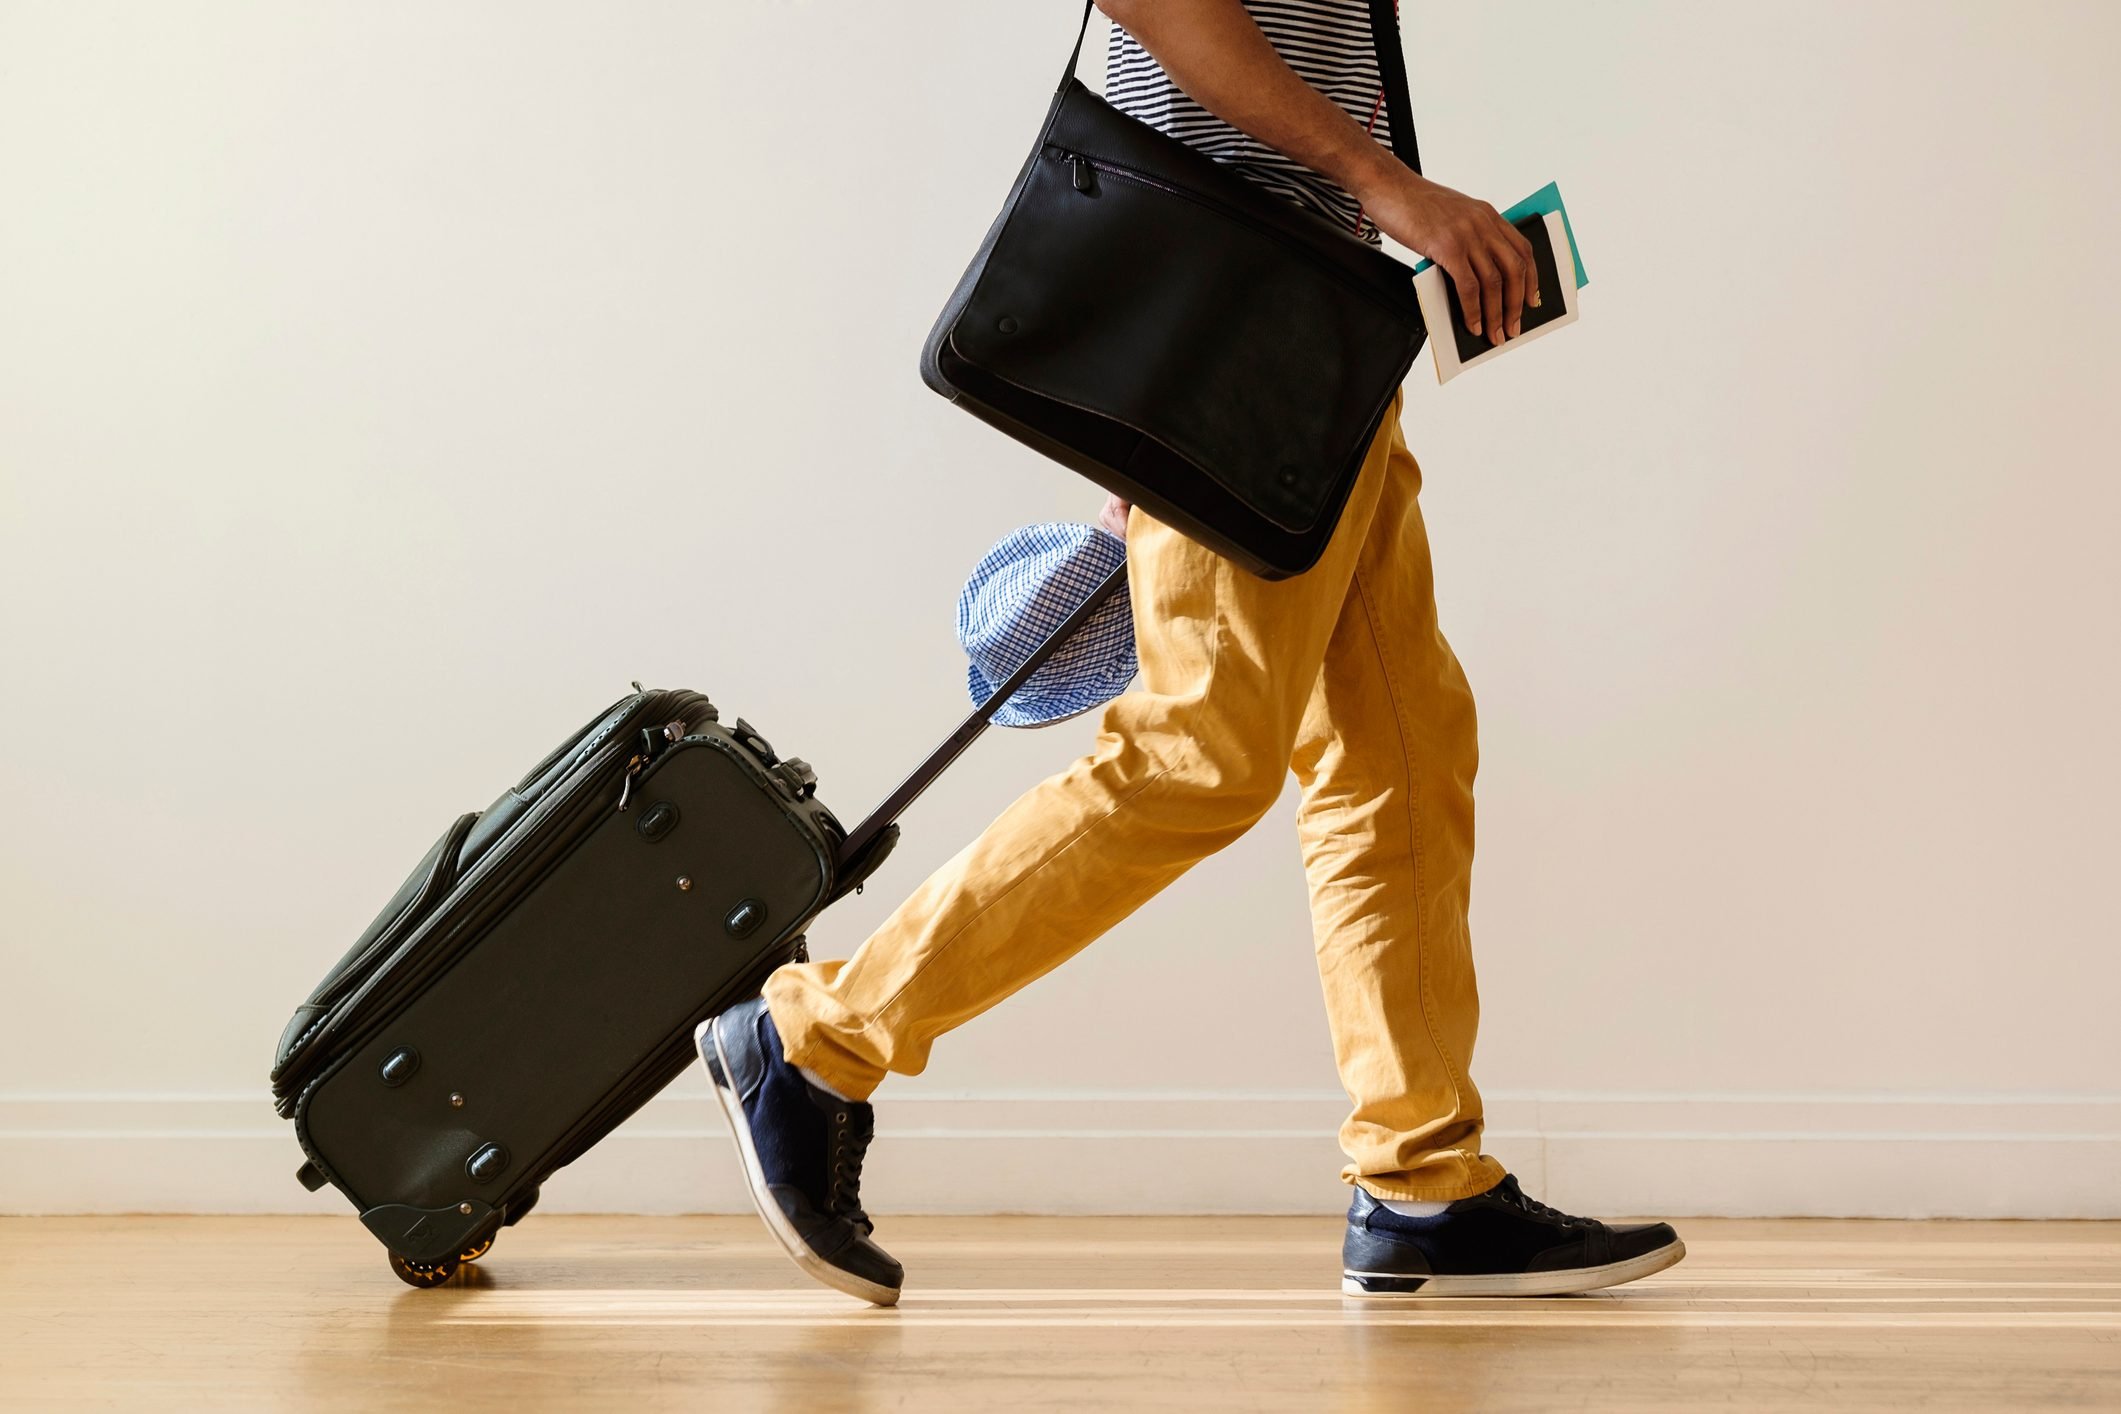 <p>Figuring out what to wear on a plane can be as challenging as deciding what to pack. In fact, what you're wearing is one of the first <a href="https://www.rd.com/article/what-a-flight-attendant-notices-about-you/" rel="noopener noreferrer">things flight attendants notice about you</a> as you're boarding. So how can you be comfortable both on the plane and when you arrive at your destination, all without sacrificing style? We went right to the source—a flight attendant—to find out the best <a href="https://www.rd.com/list/airplane-travel-mistakes/" rel="noopener noreferrer">rules to follow when you fly</a>, including <a href="https://www.rd.com/list/things-flight-attendants-wouldnt-do/" rel="noopener noreferrer">things flight attendants wouldn't do on an airplane</a> (like wearing stilettos).</p> <p>"Remember, you are sitting in a piece of machinery with confined spaces, sharp objects and strangers," says Amy Caris, a flight attendant and the Director of In-Flight at JSX, a "hop on" jet service. "Don't wear your best outfit, but wear something that is comfortable and can slightly stretch. Comfort can be stylish!" Read on for more <a href="https://www.rd.com/list/13-things-your-flight-attendant-wont-tell-you/" rel="noopener noreferrer">flight attendant secrets</a> about dressing.</p>